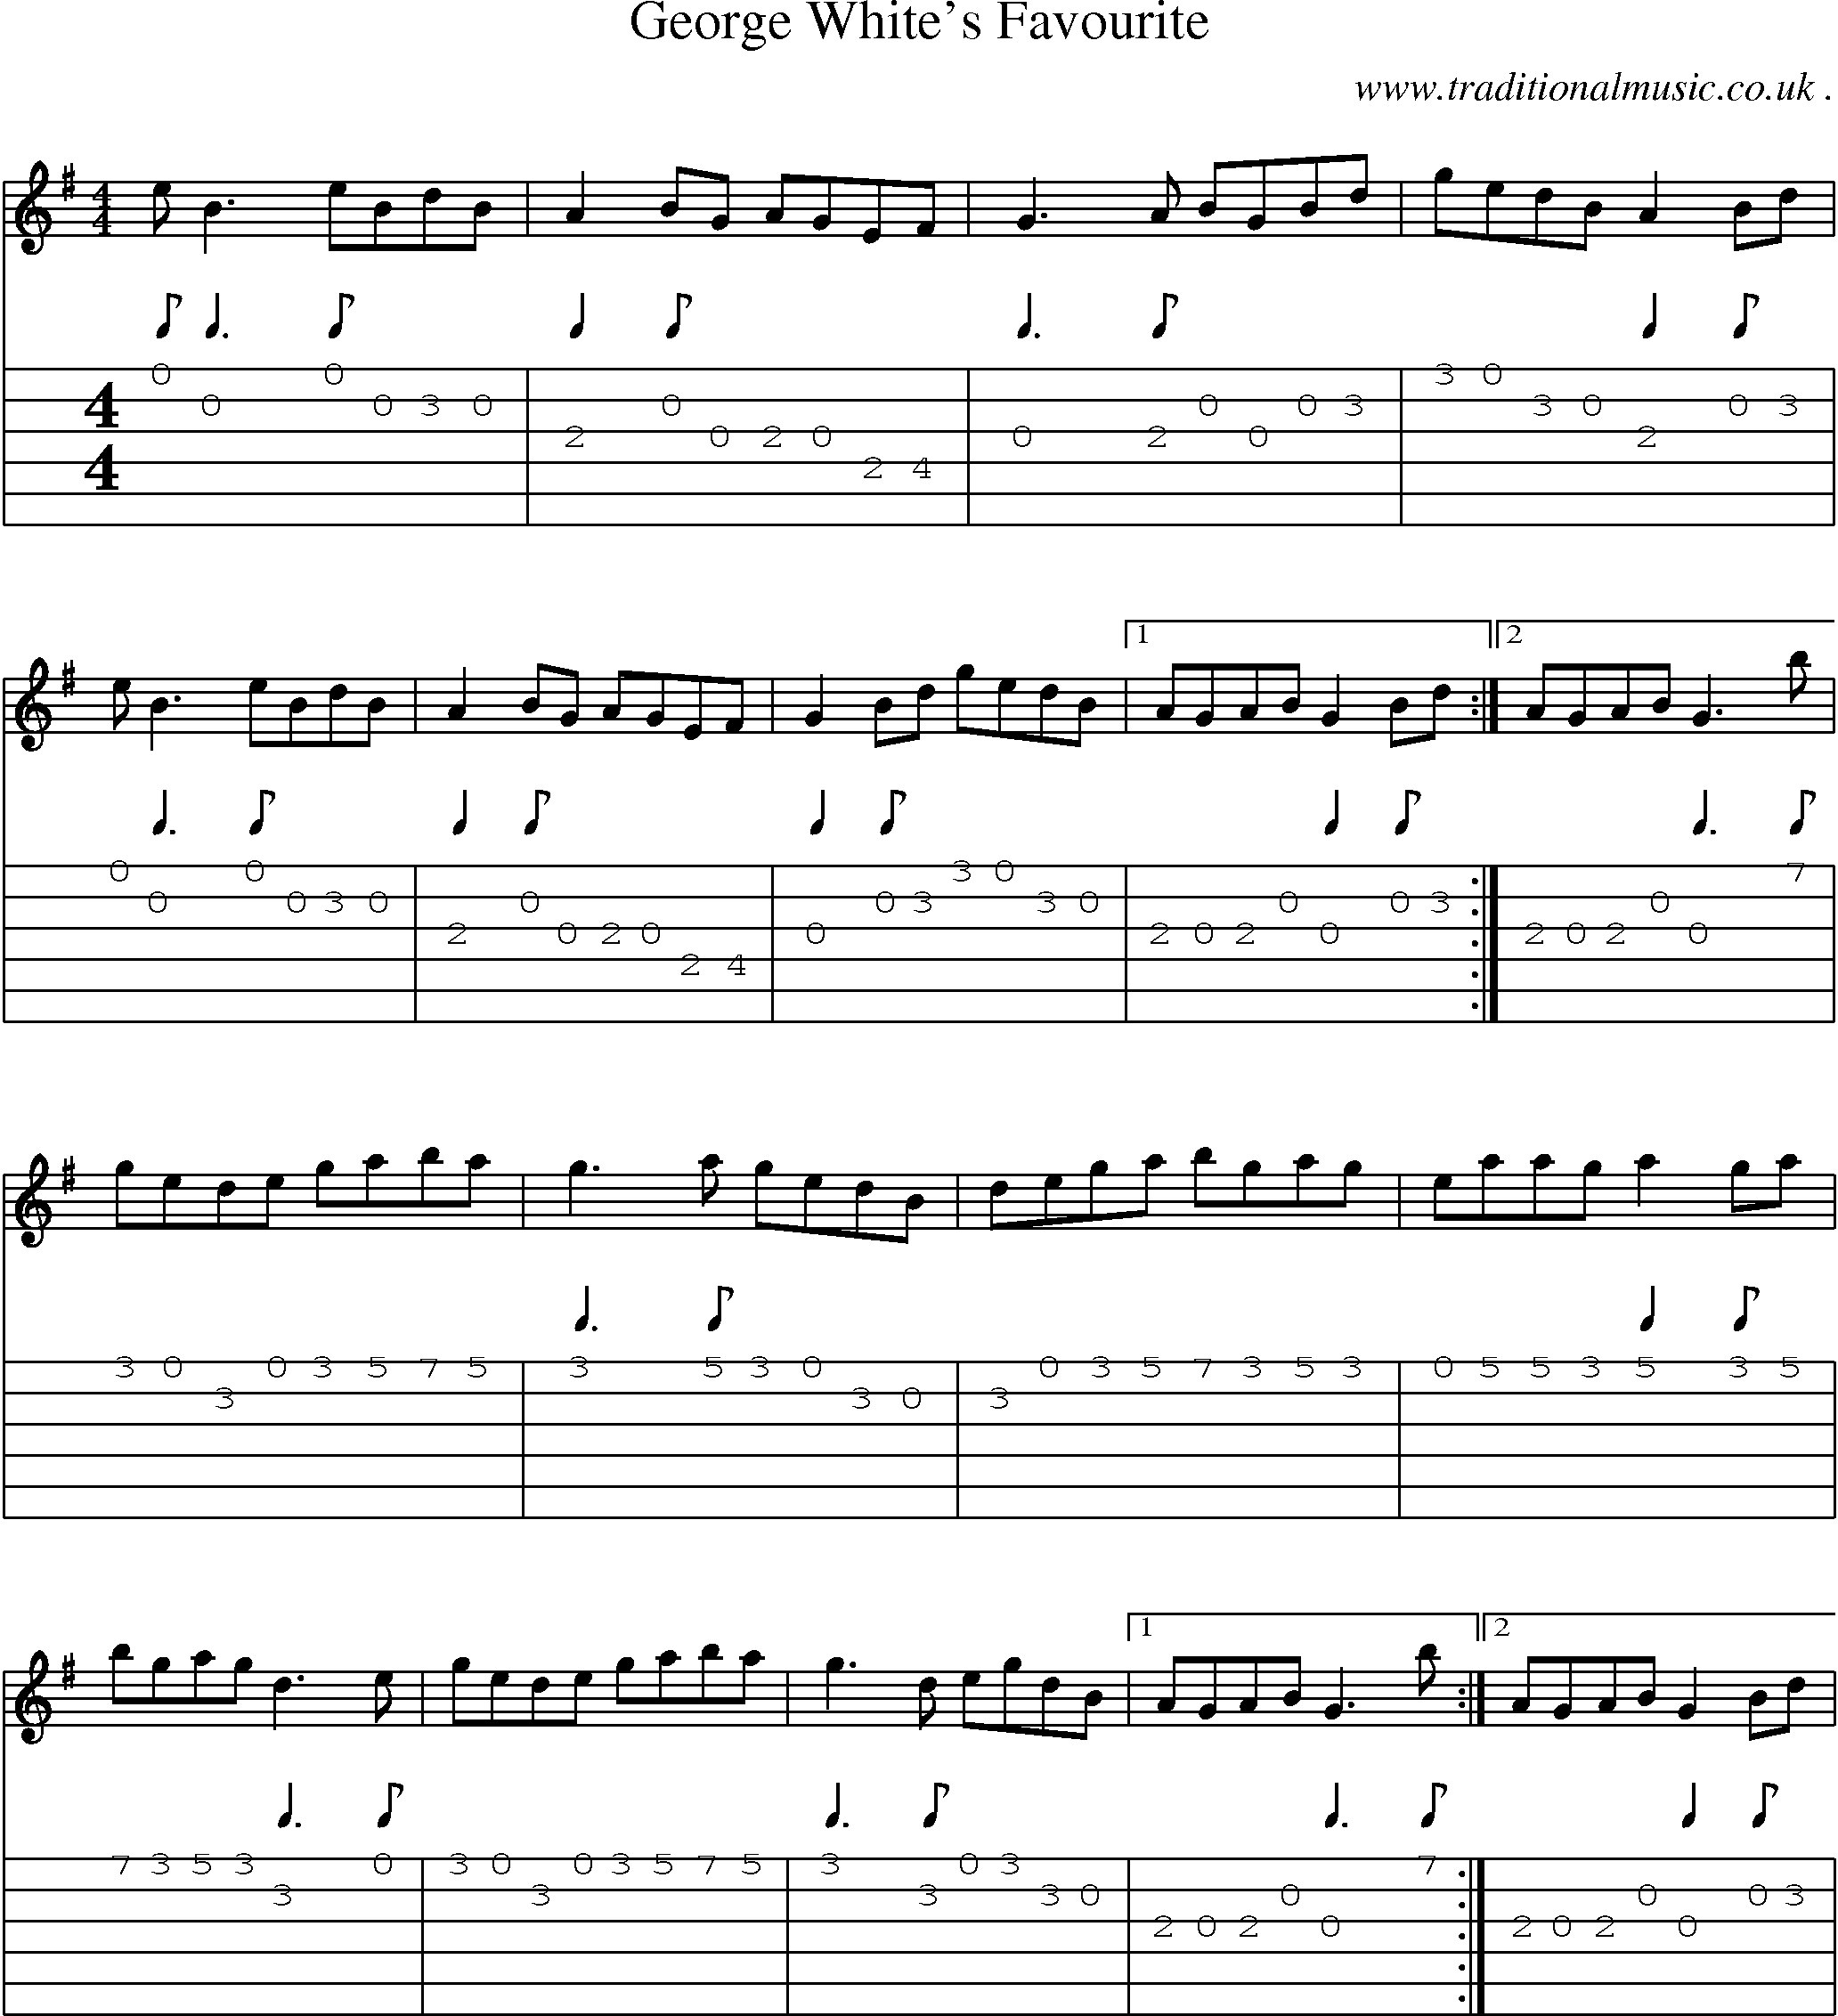 Sheet-Music and Guitar Tabs for George Whites Favourite